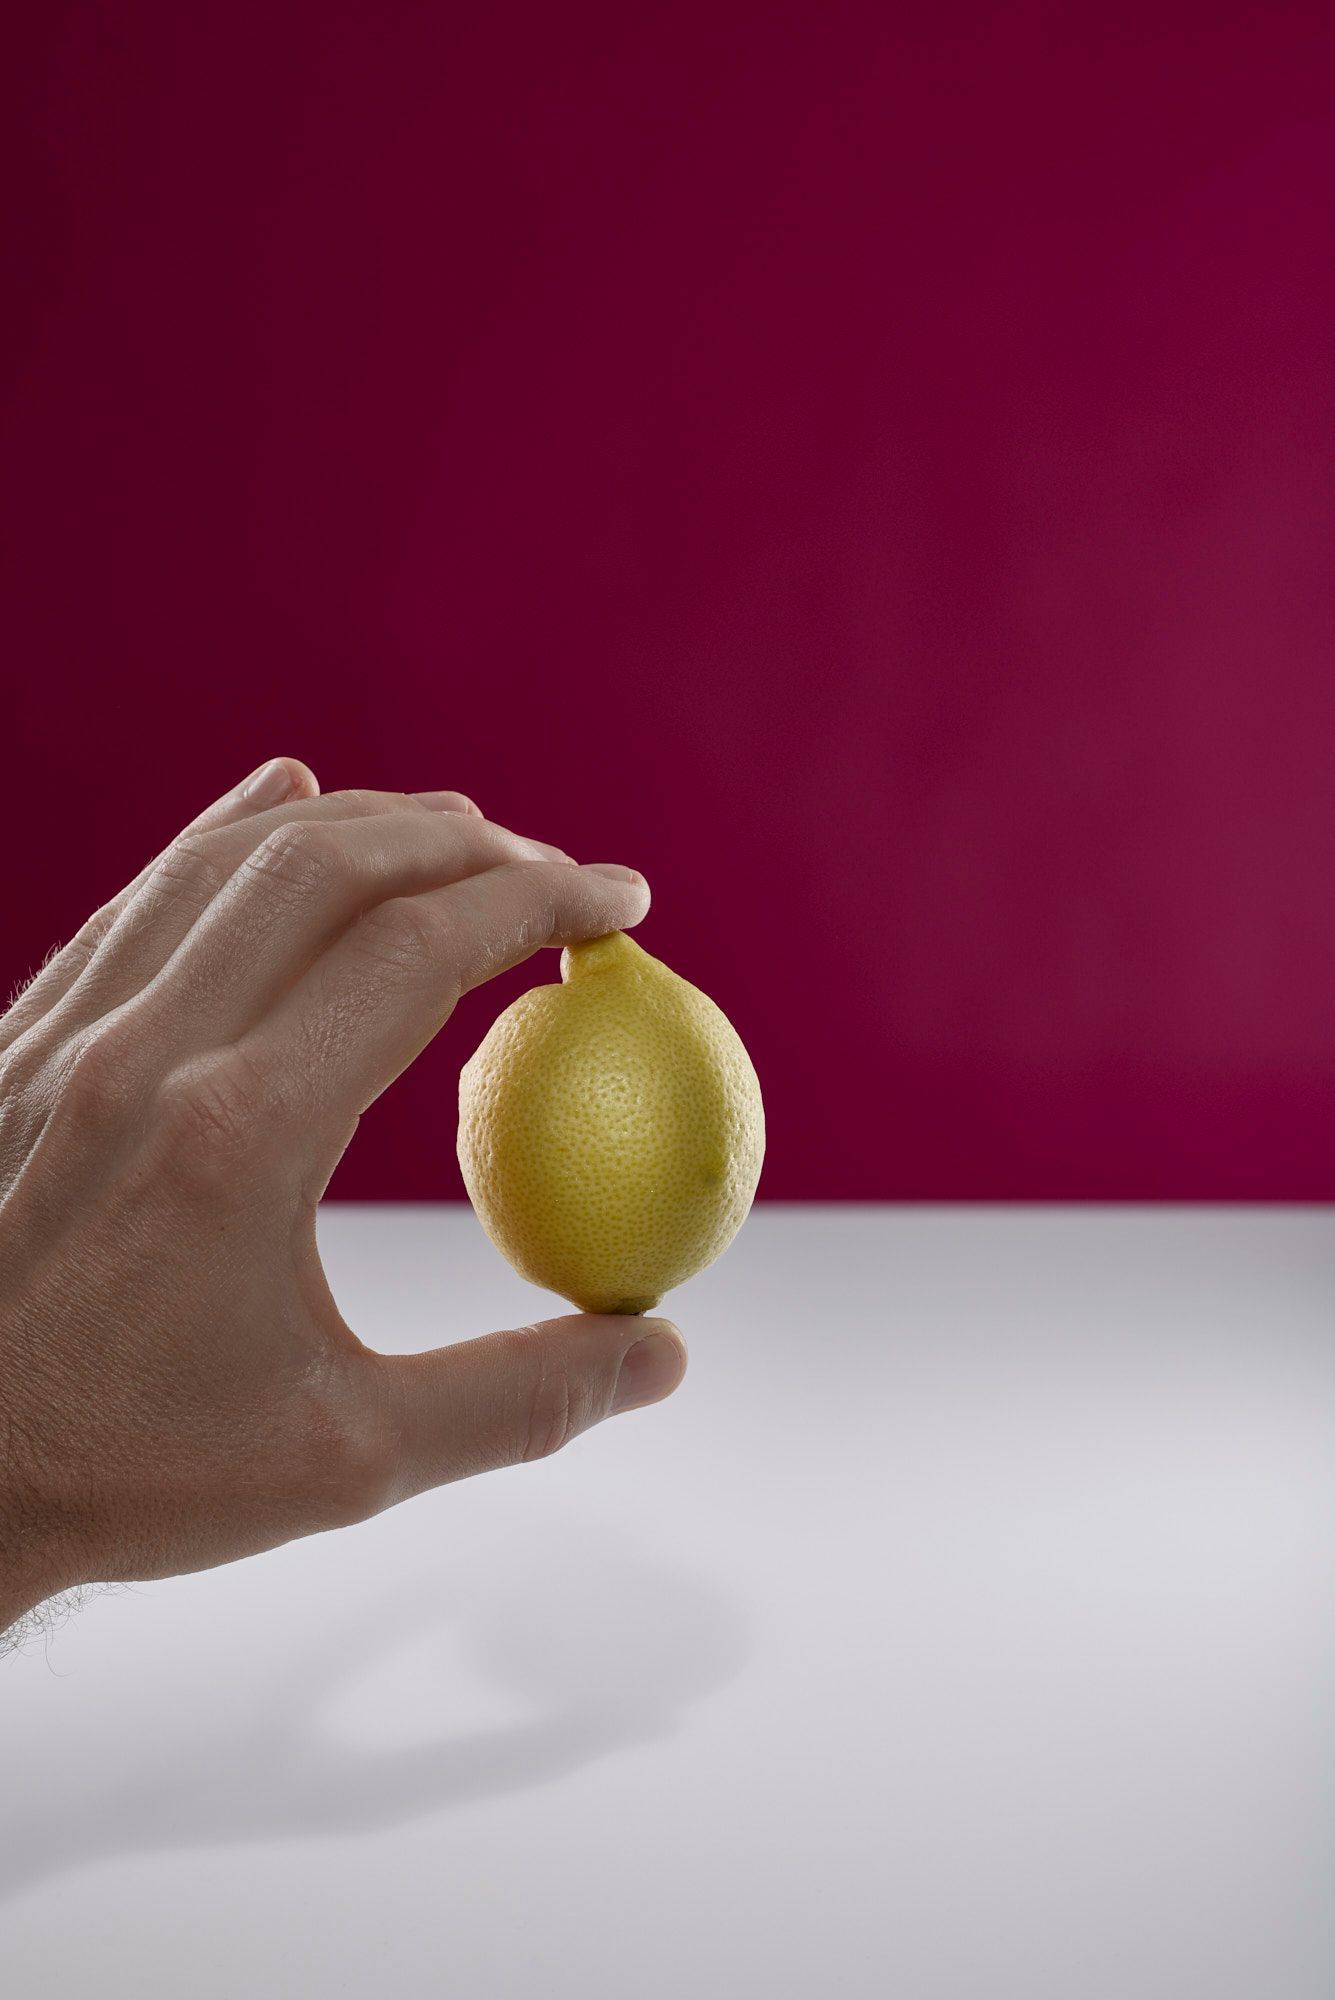 hand holding a lemon with white and pink background